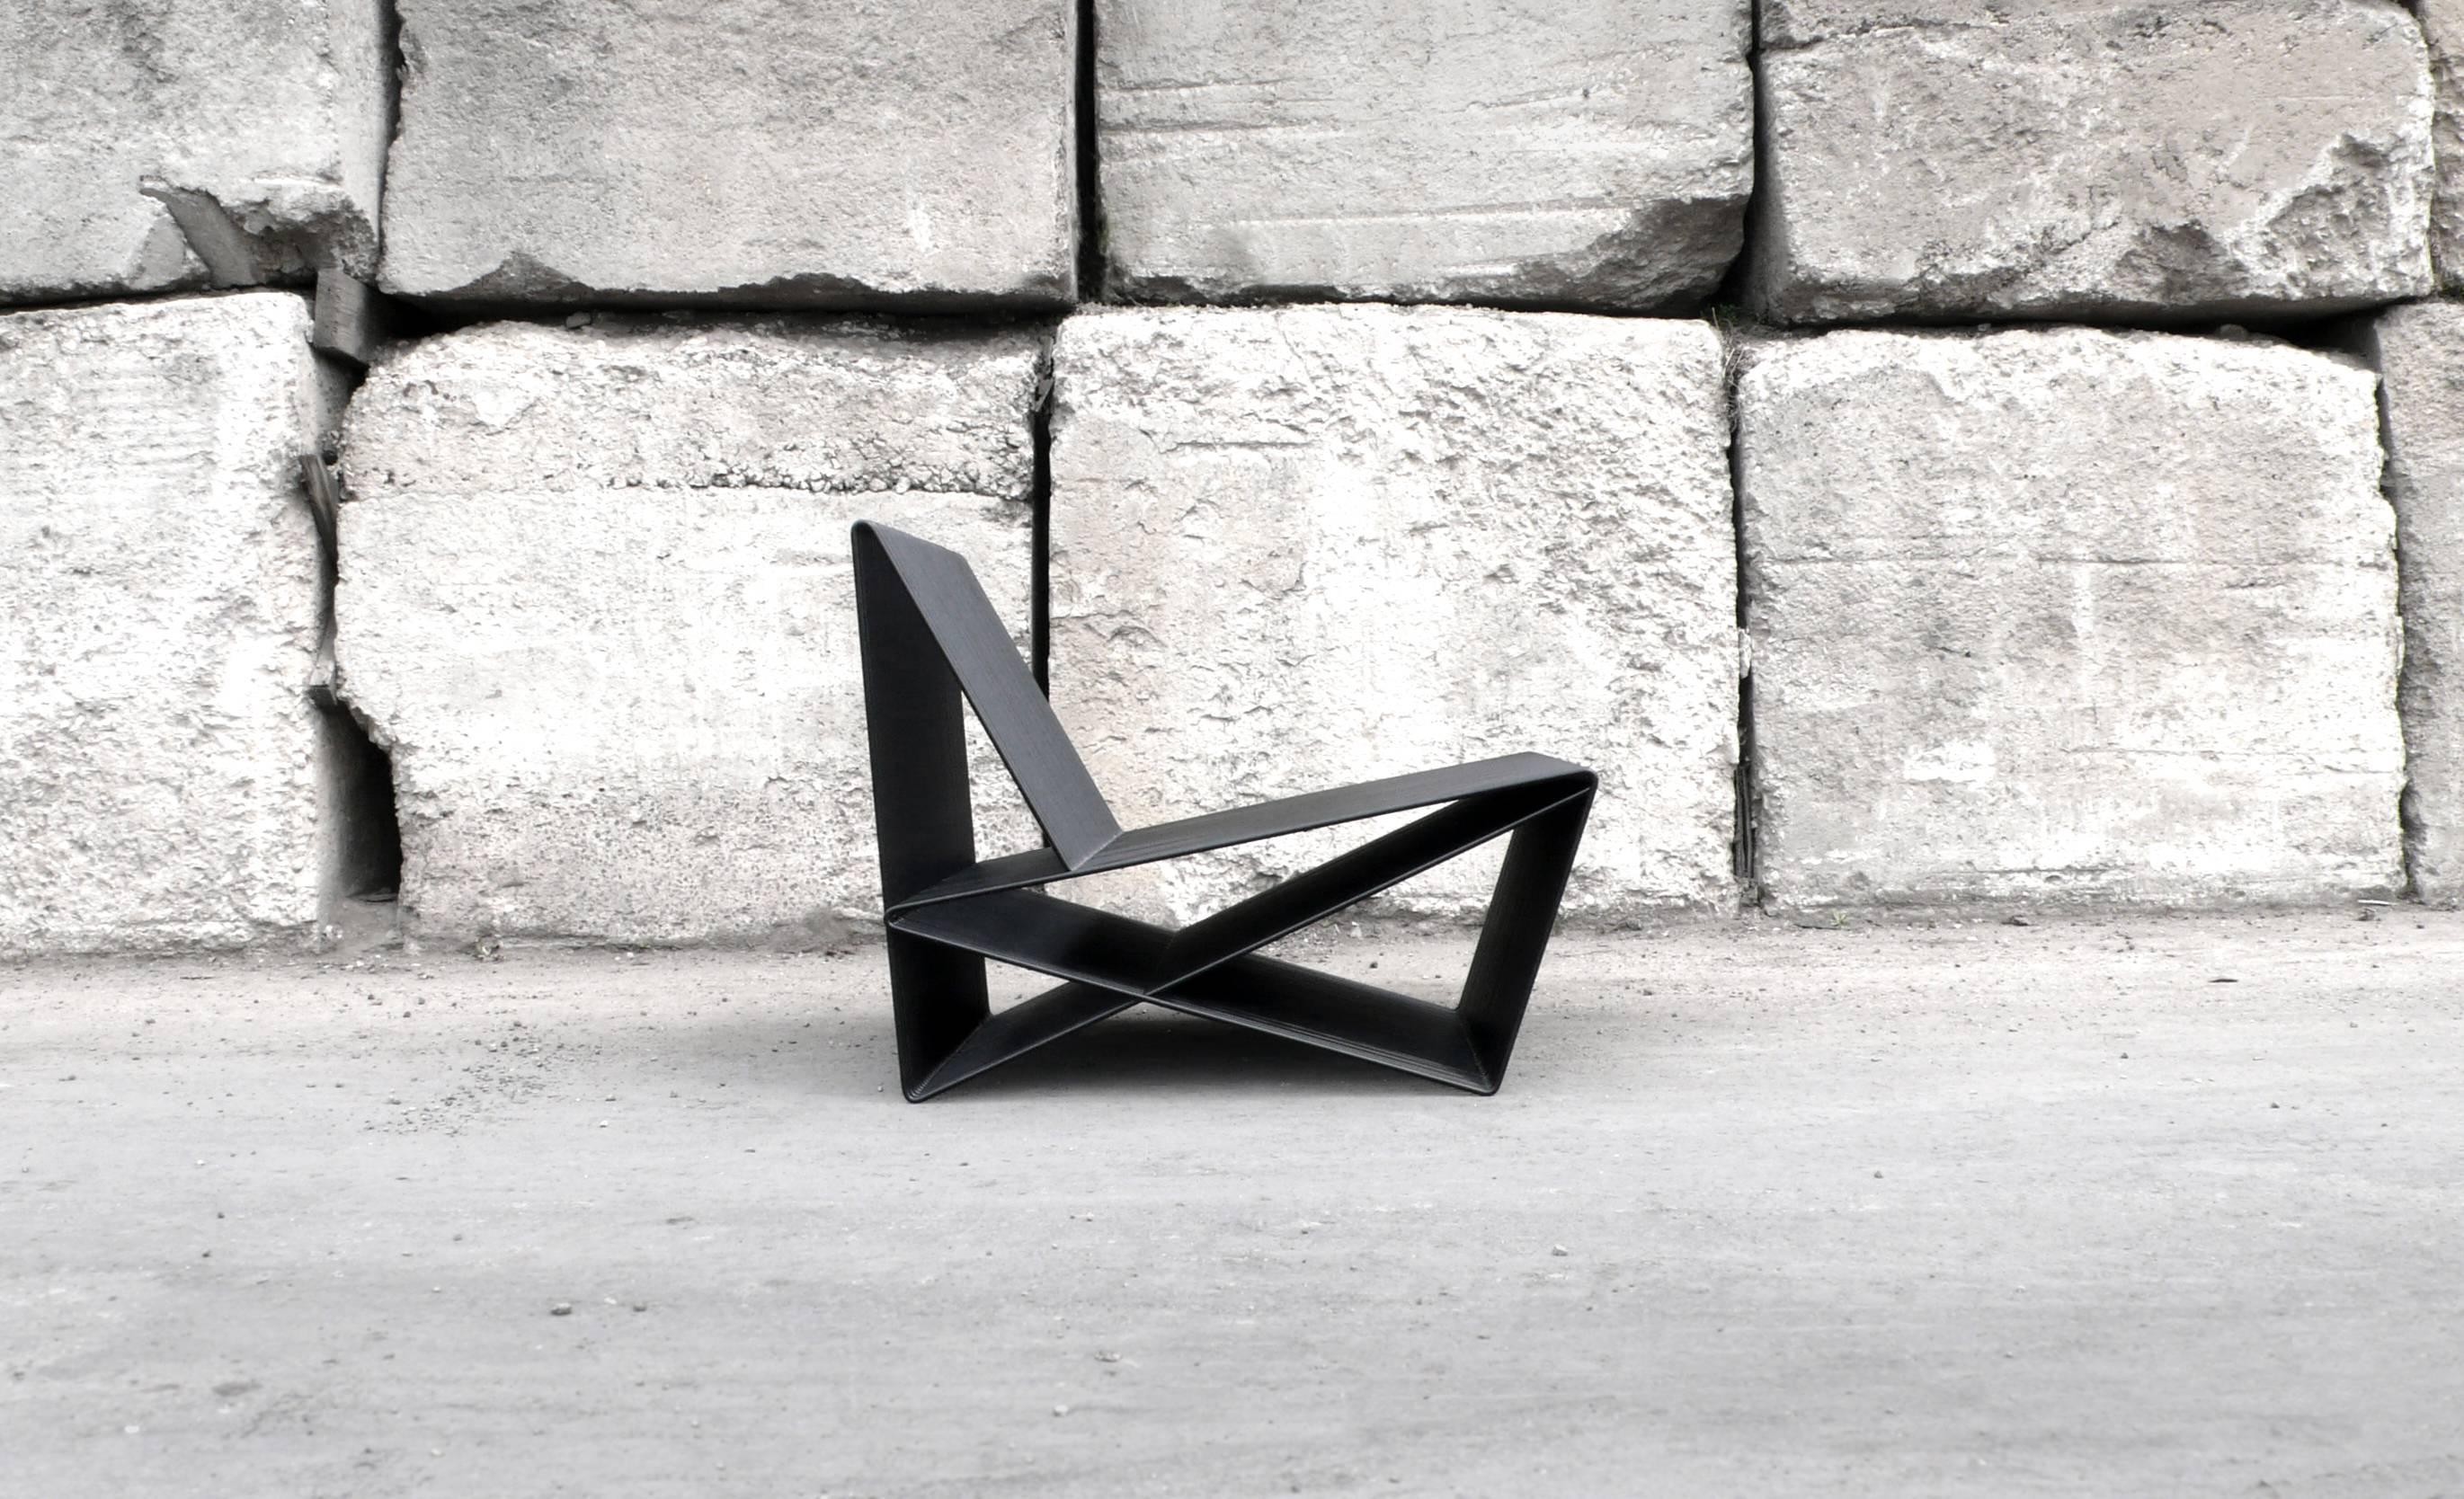 Circuit is a powder-coated steel rod lounge chair. Comprised of a series of loops that intersect at critical points to form its structure, Circuit challenges perception and form as it relates to structure. Its multiple planes of repeated lines